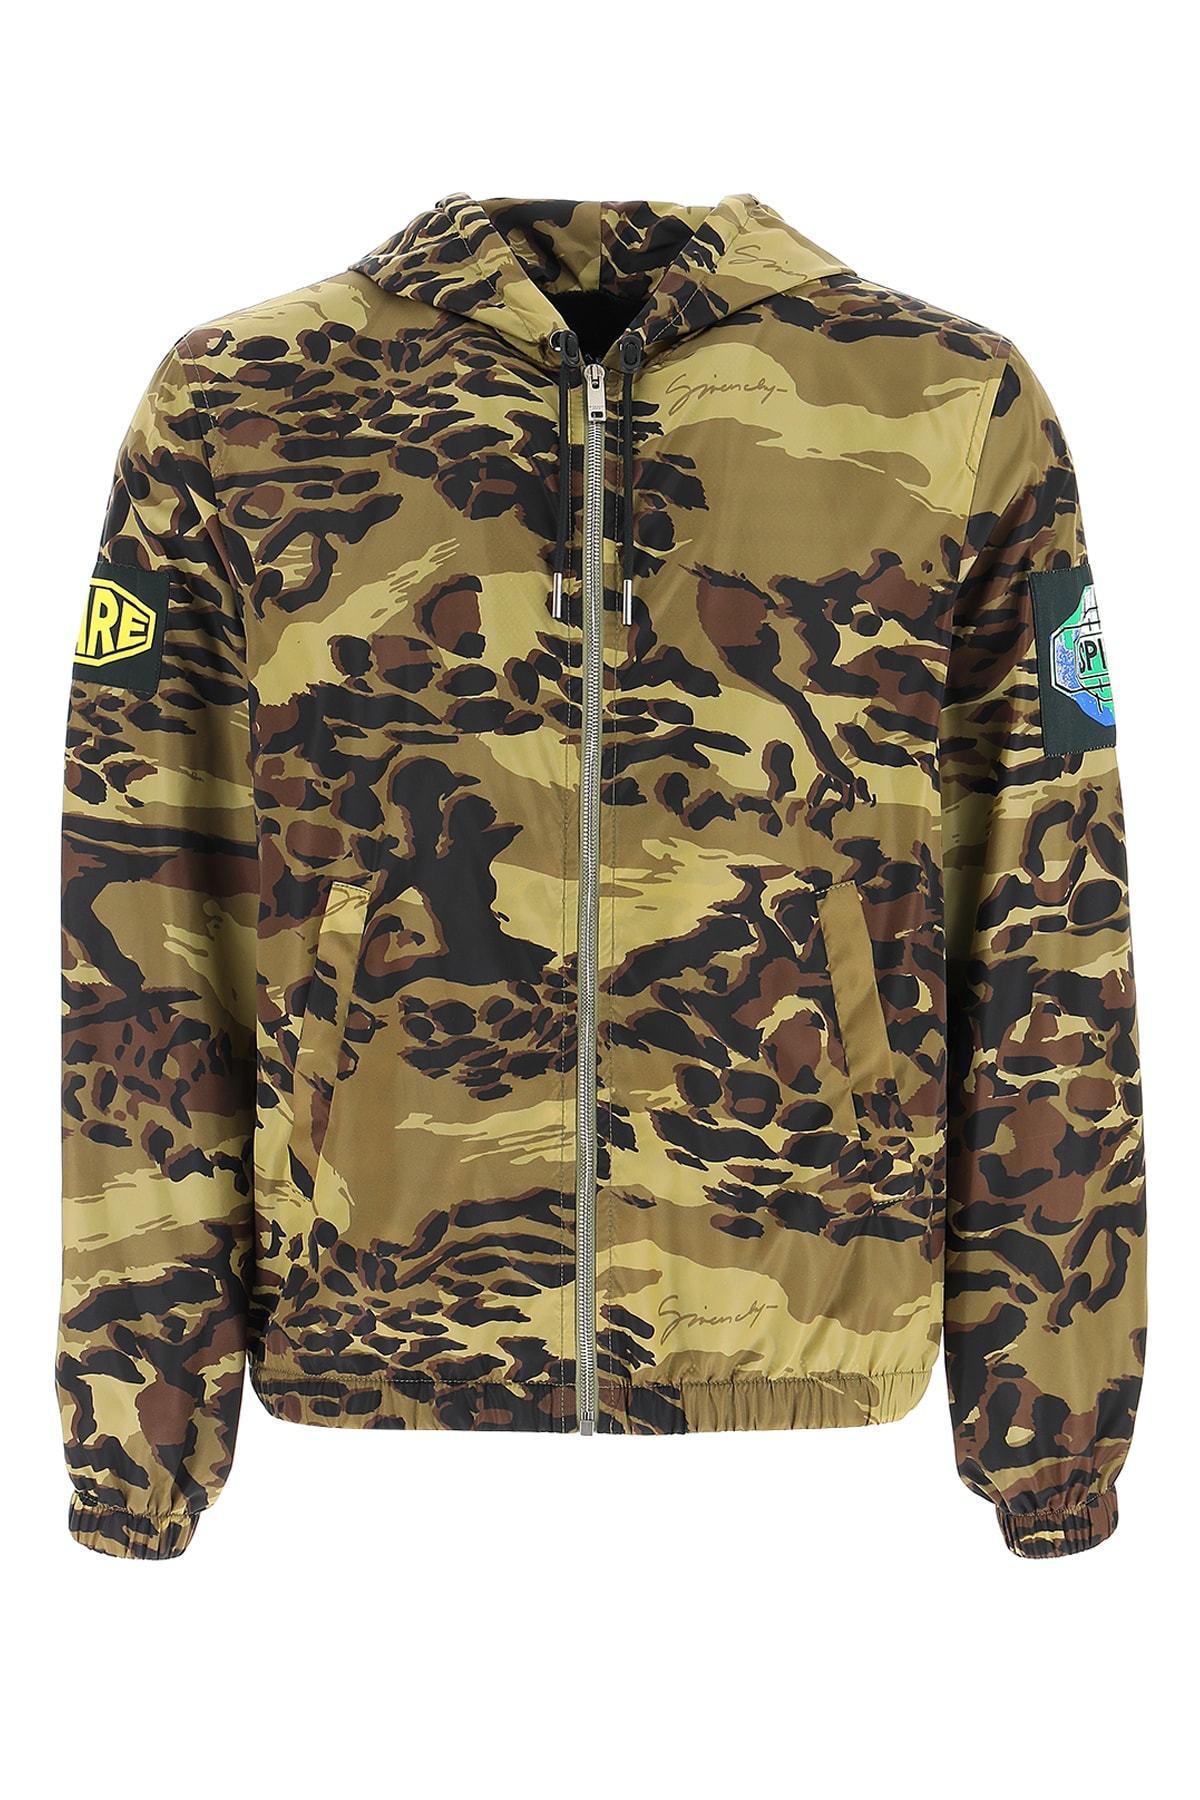 Givenchy Synthetic Camouflage Printed Windbreaker for Men - Lyst